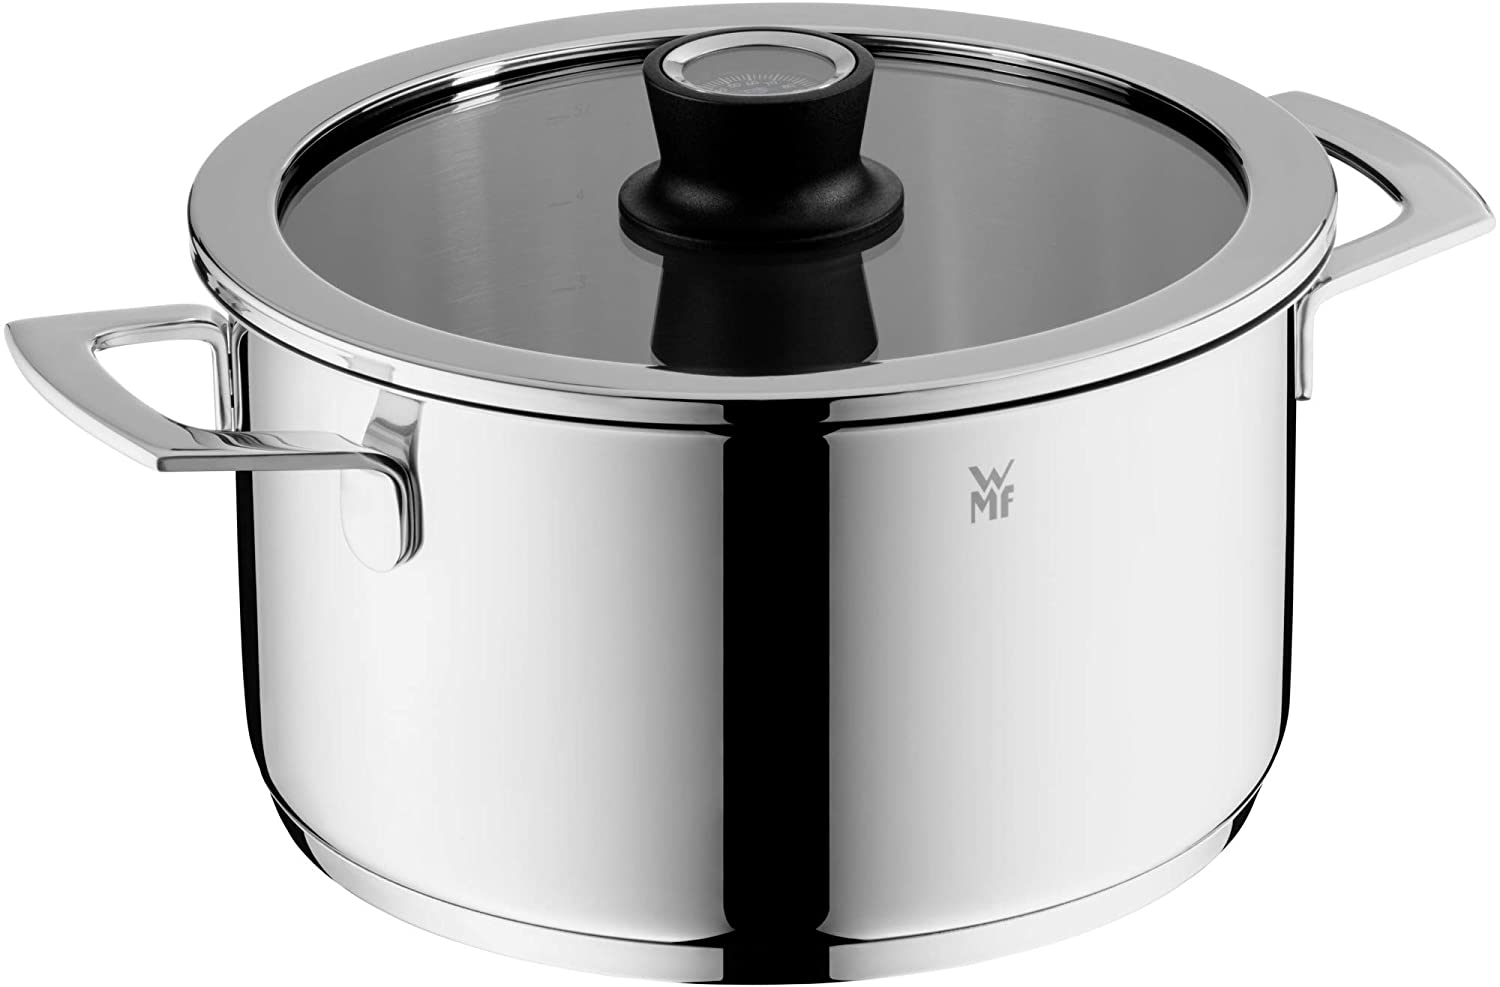 WMF 779246380 Pots, Stainless Steel